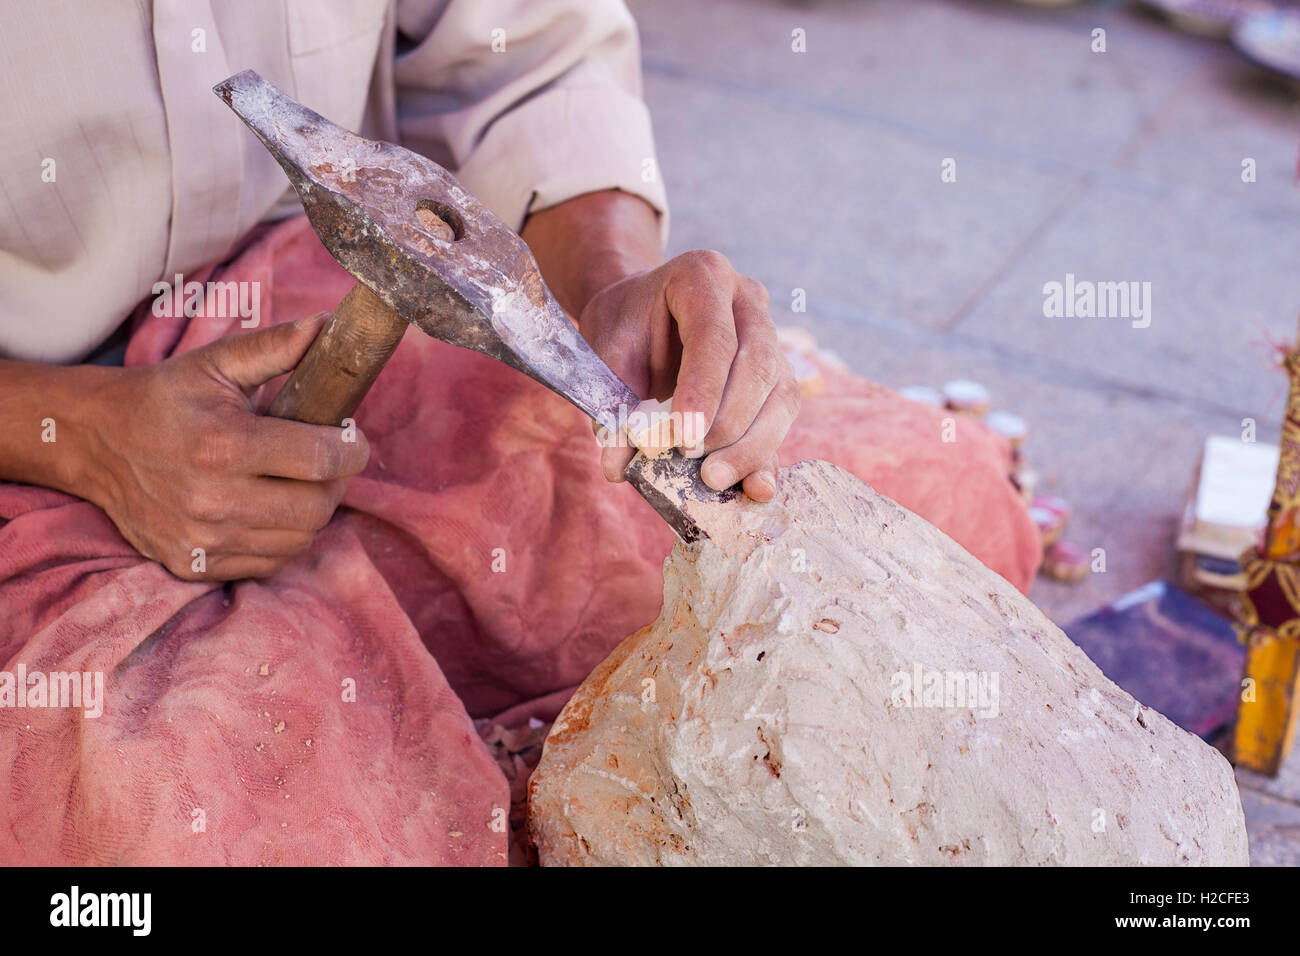 Artisan makes pieces for mosaic craftwork. He is shaping pieces from glazed tiles Stock Photo